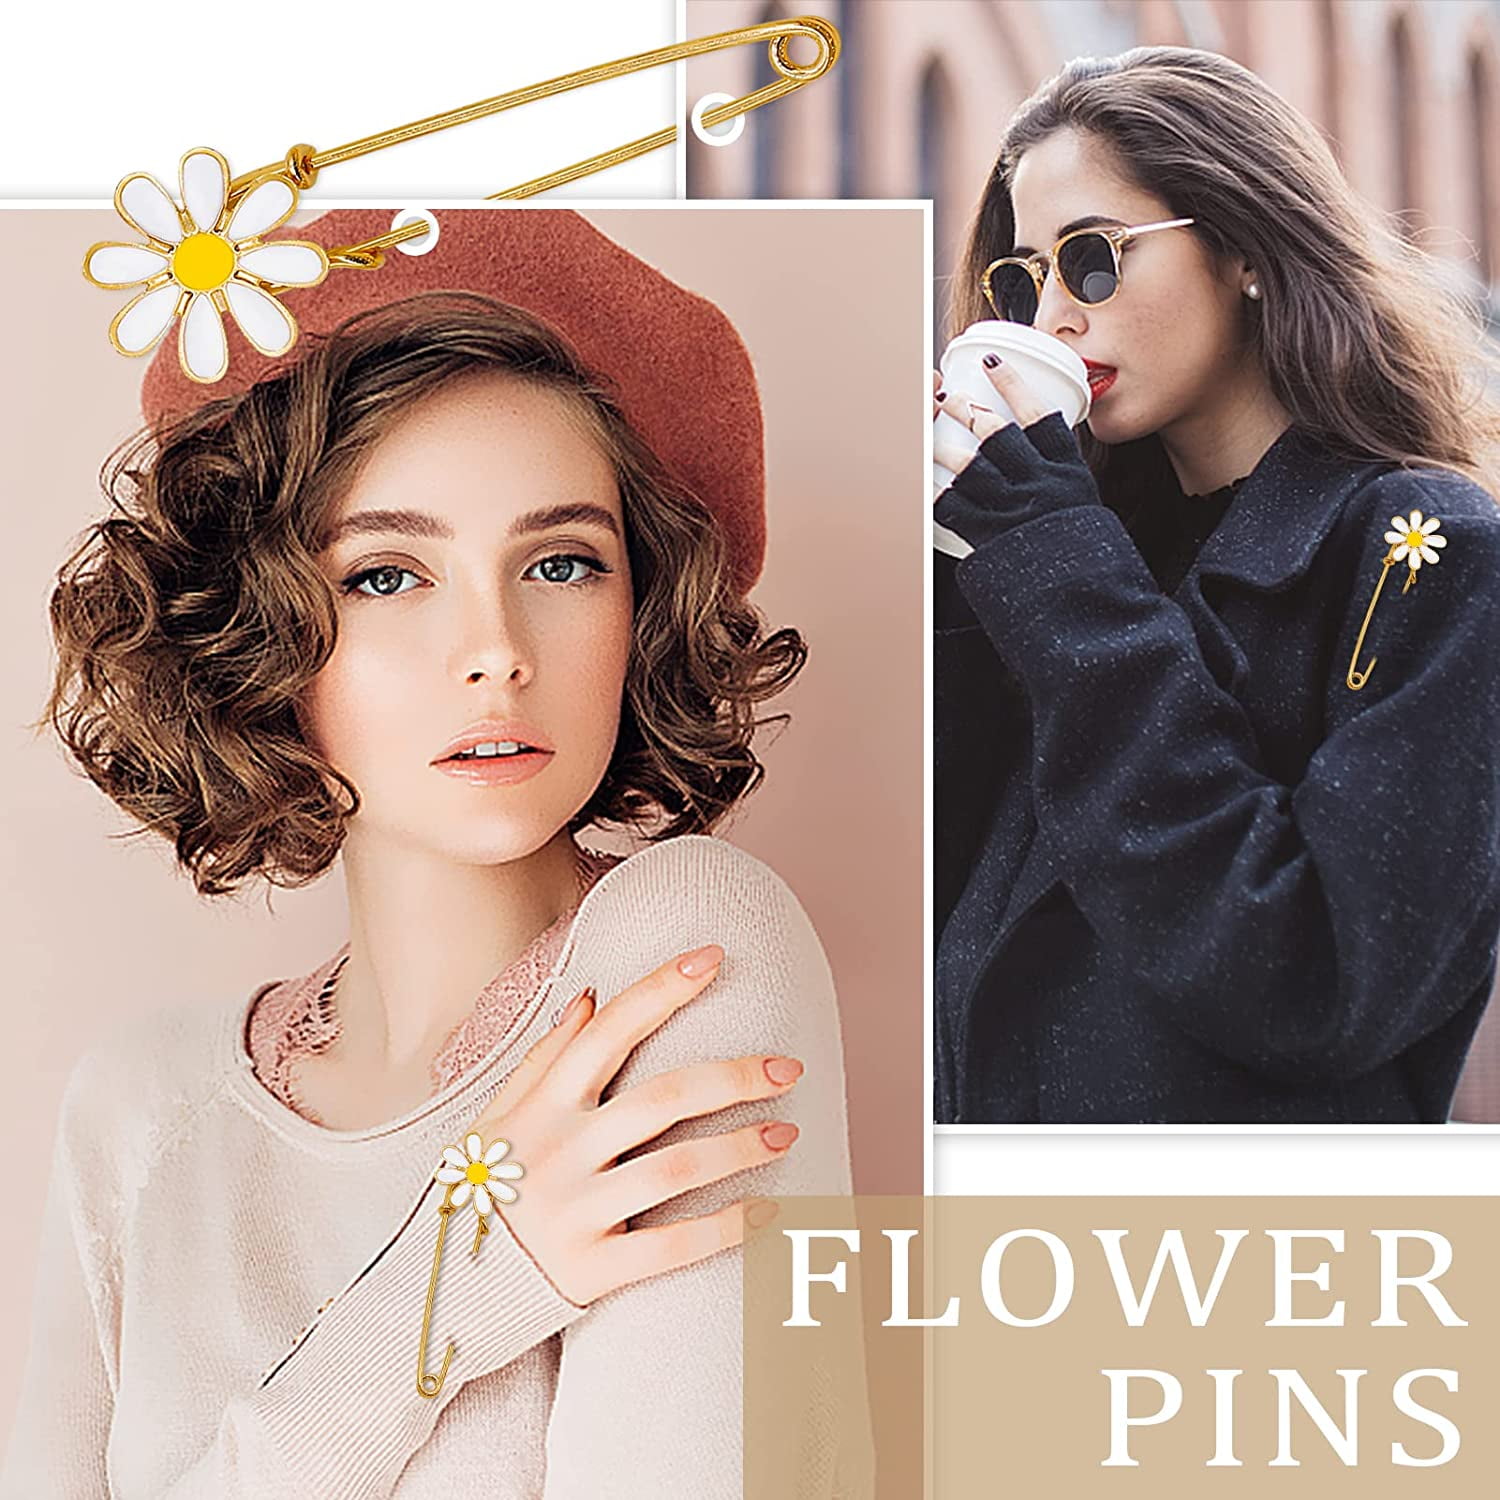 Stylish Ears Of Wheat Pearl Sweater Shawl Pins Clips Scarf Accessory  Banquet Party Corsage Women's Brooch, Brooch Pins